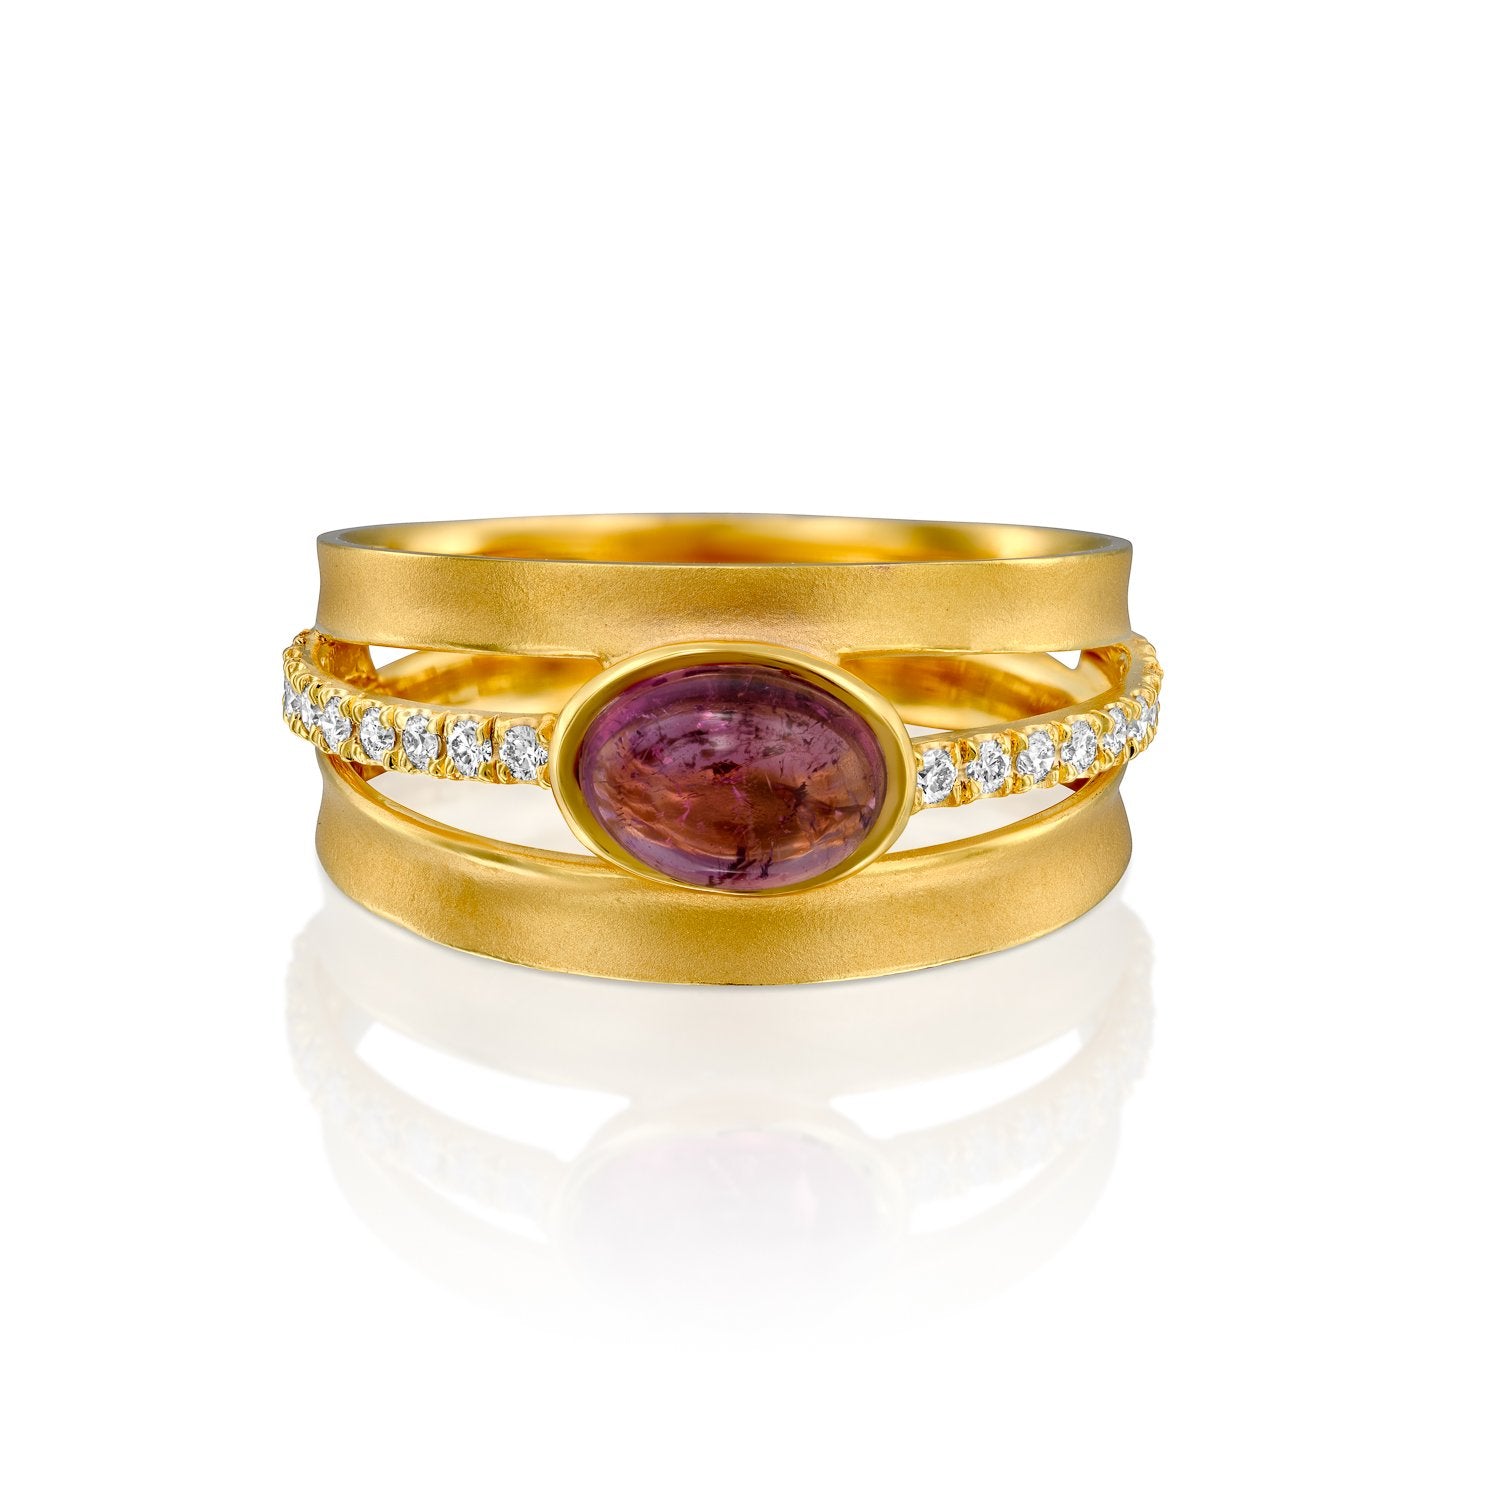 4979 - 14kt yellow satin matte finish gold ring with shiny edges. natural cabochon rich pink oval-shaped tourmaline in a bezel setting, with pave .18cttw white diamond 